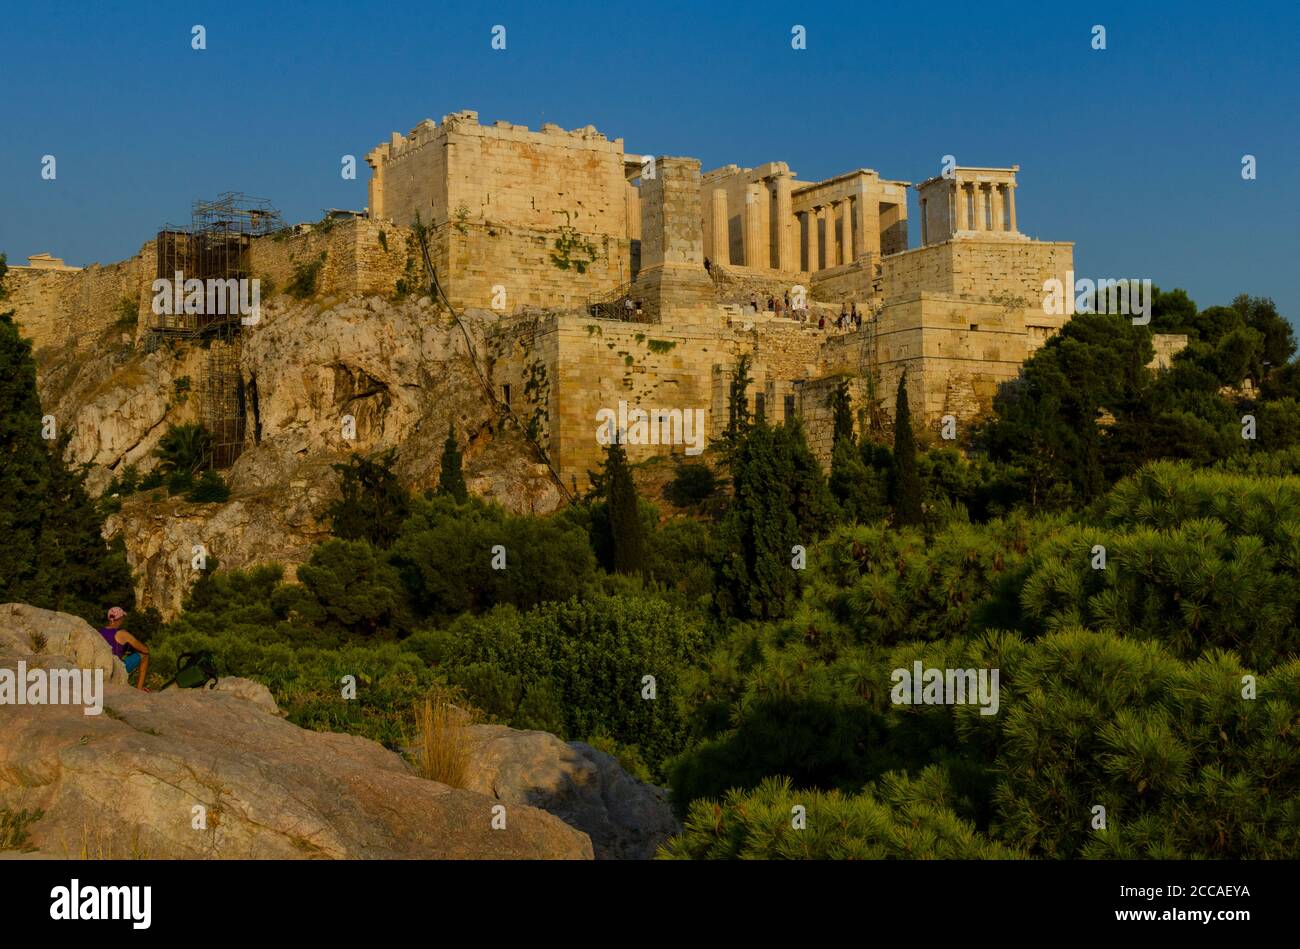 The Parthenon and ancient Acropolis from Aeropagus Hill in downtown Athens - Photo: Geopix/Alamy Stock Photo Stock Photo